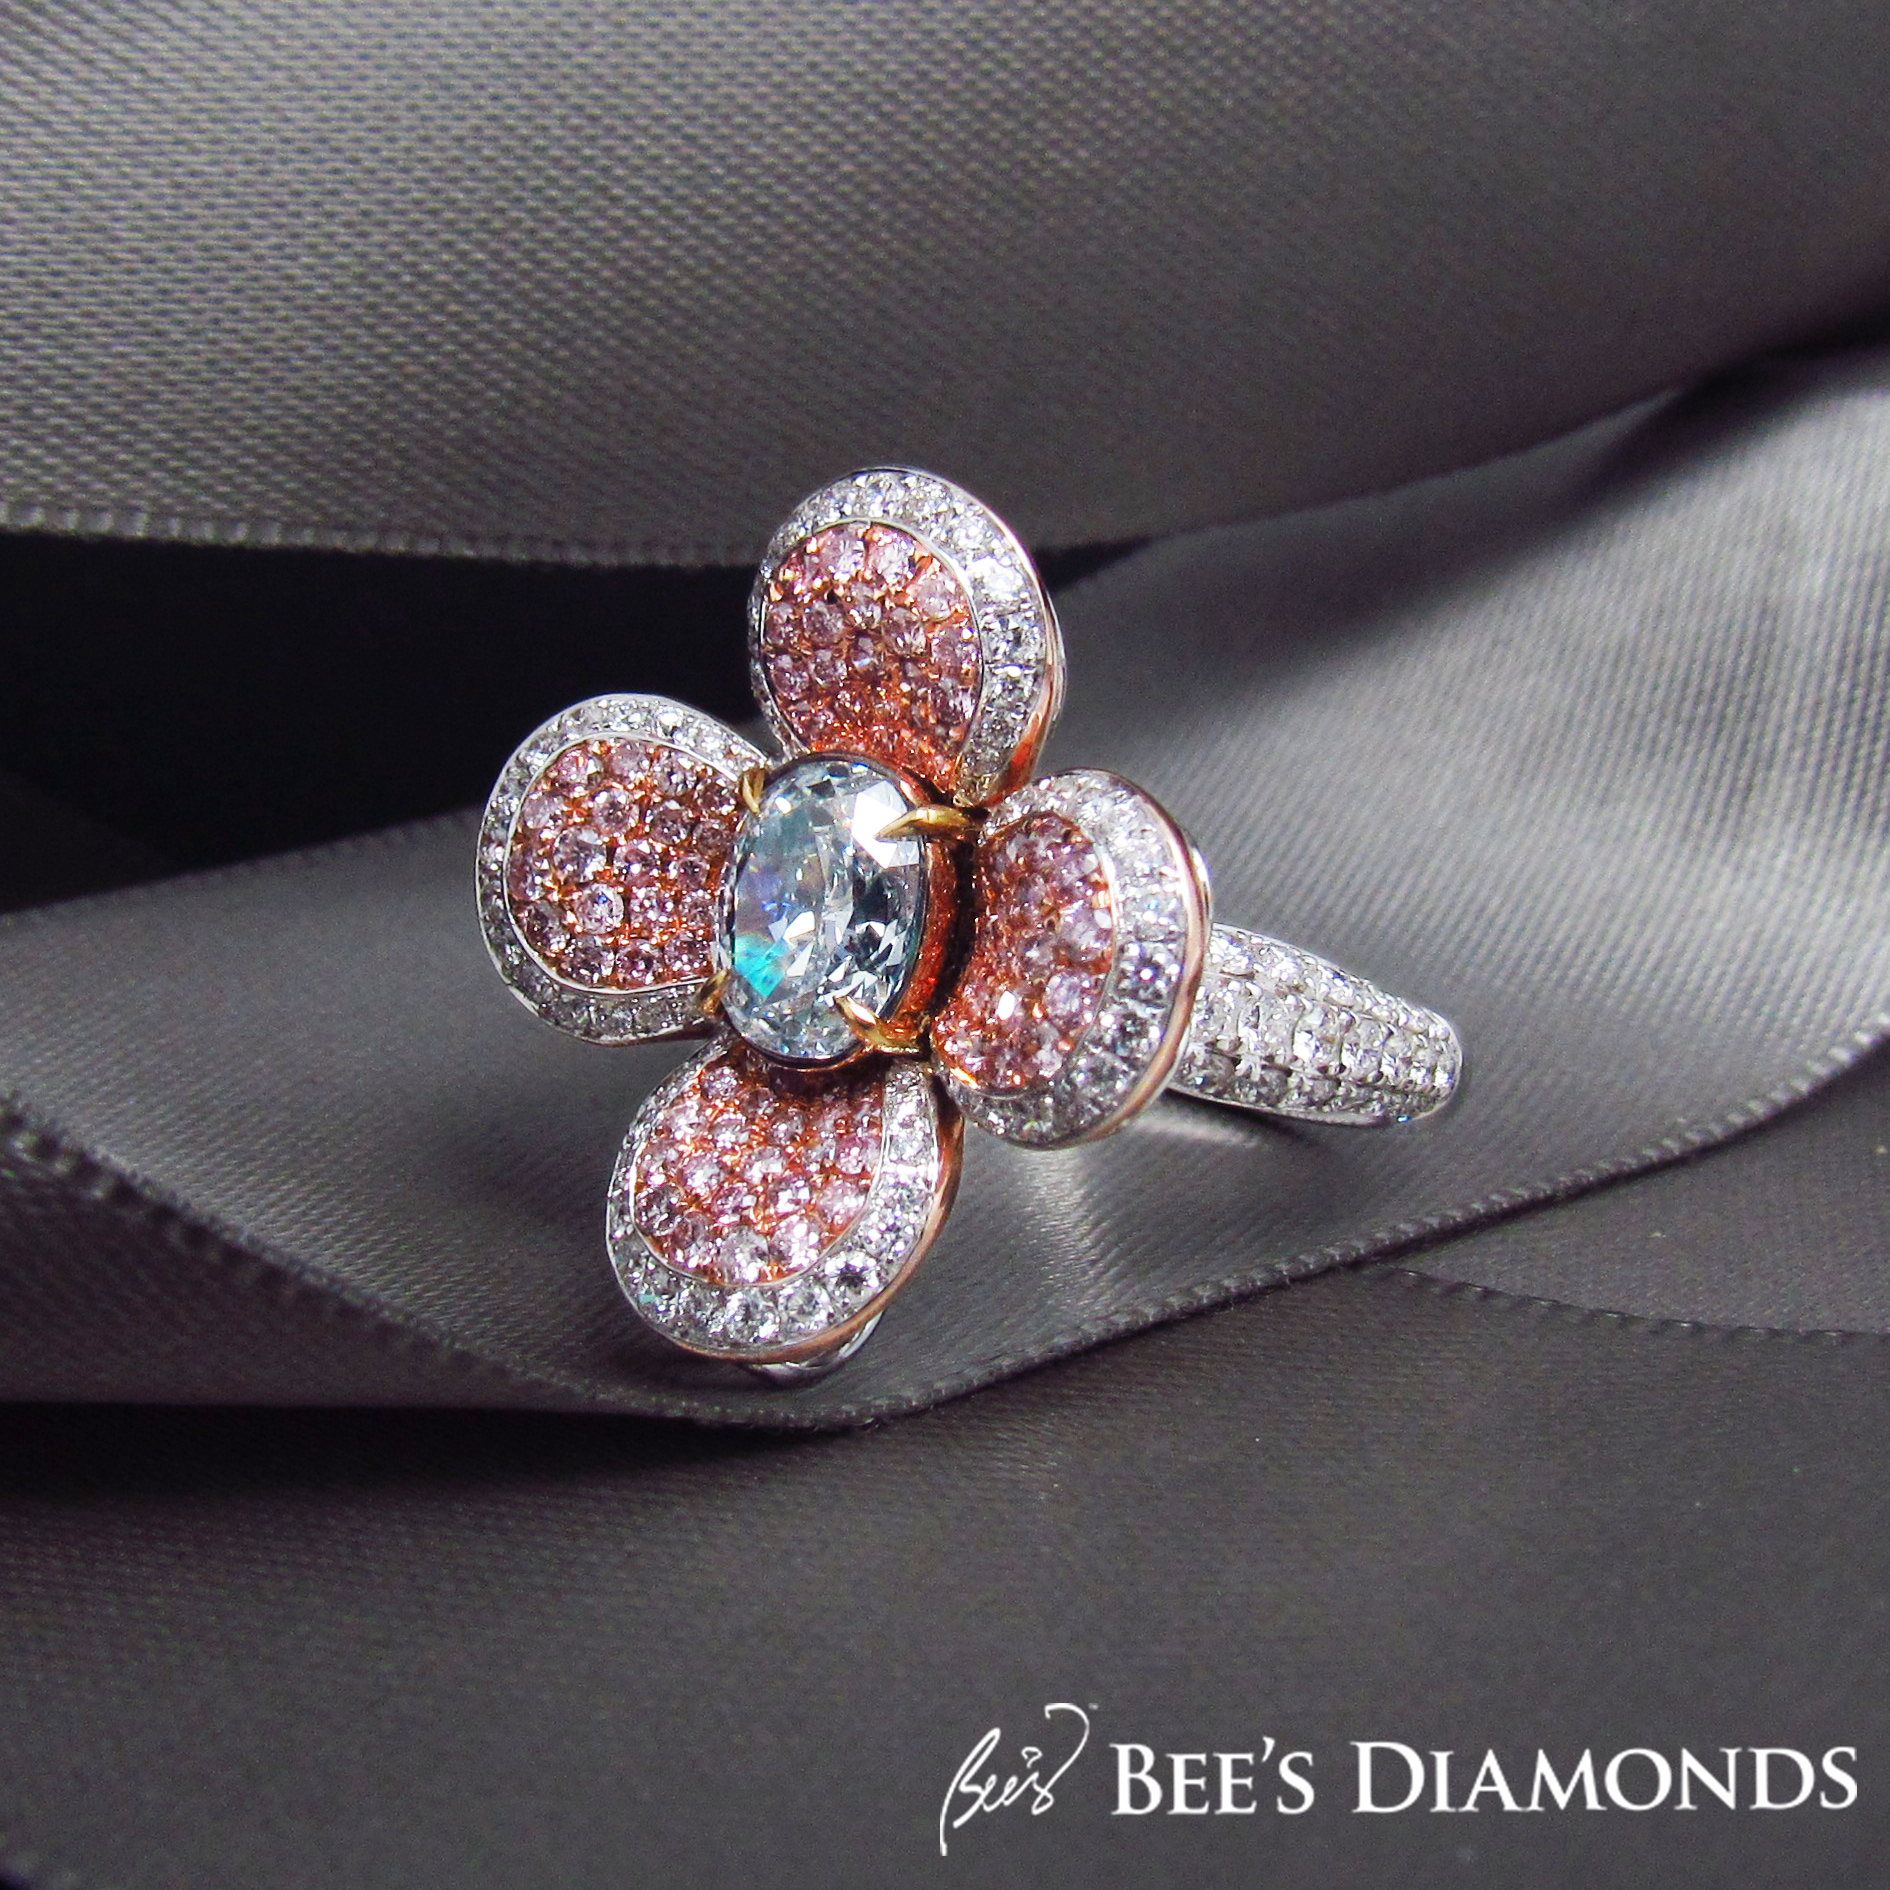 Blue and pink diamond ring, floral design cocktail | Bee's Diamonds